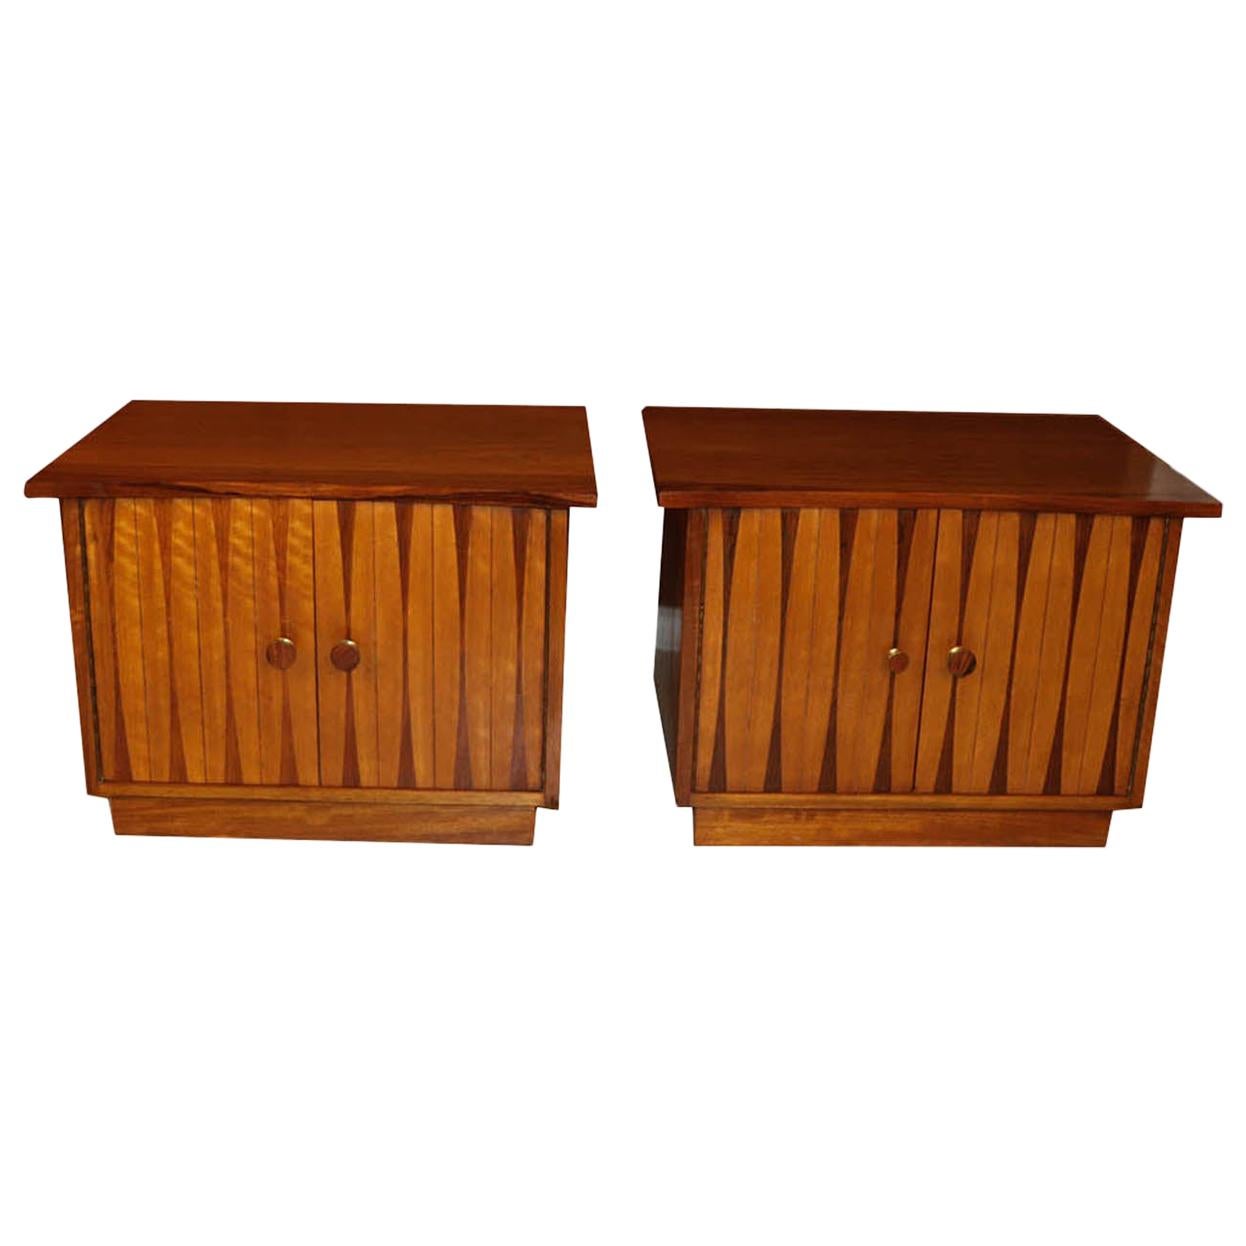 Midcentury Lane Furniture Nightstands Cabinets Tables